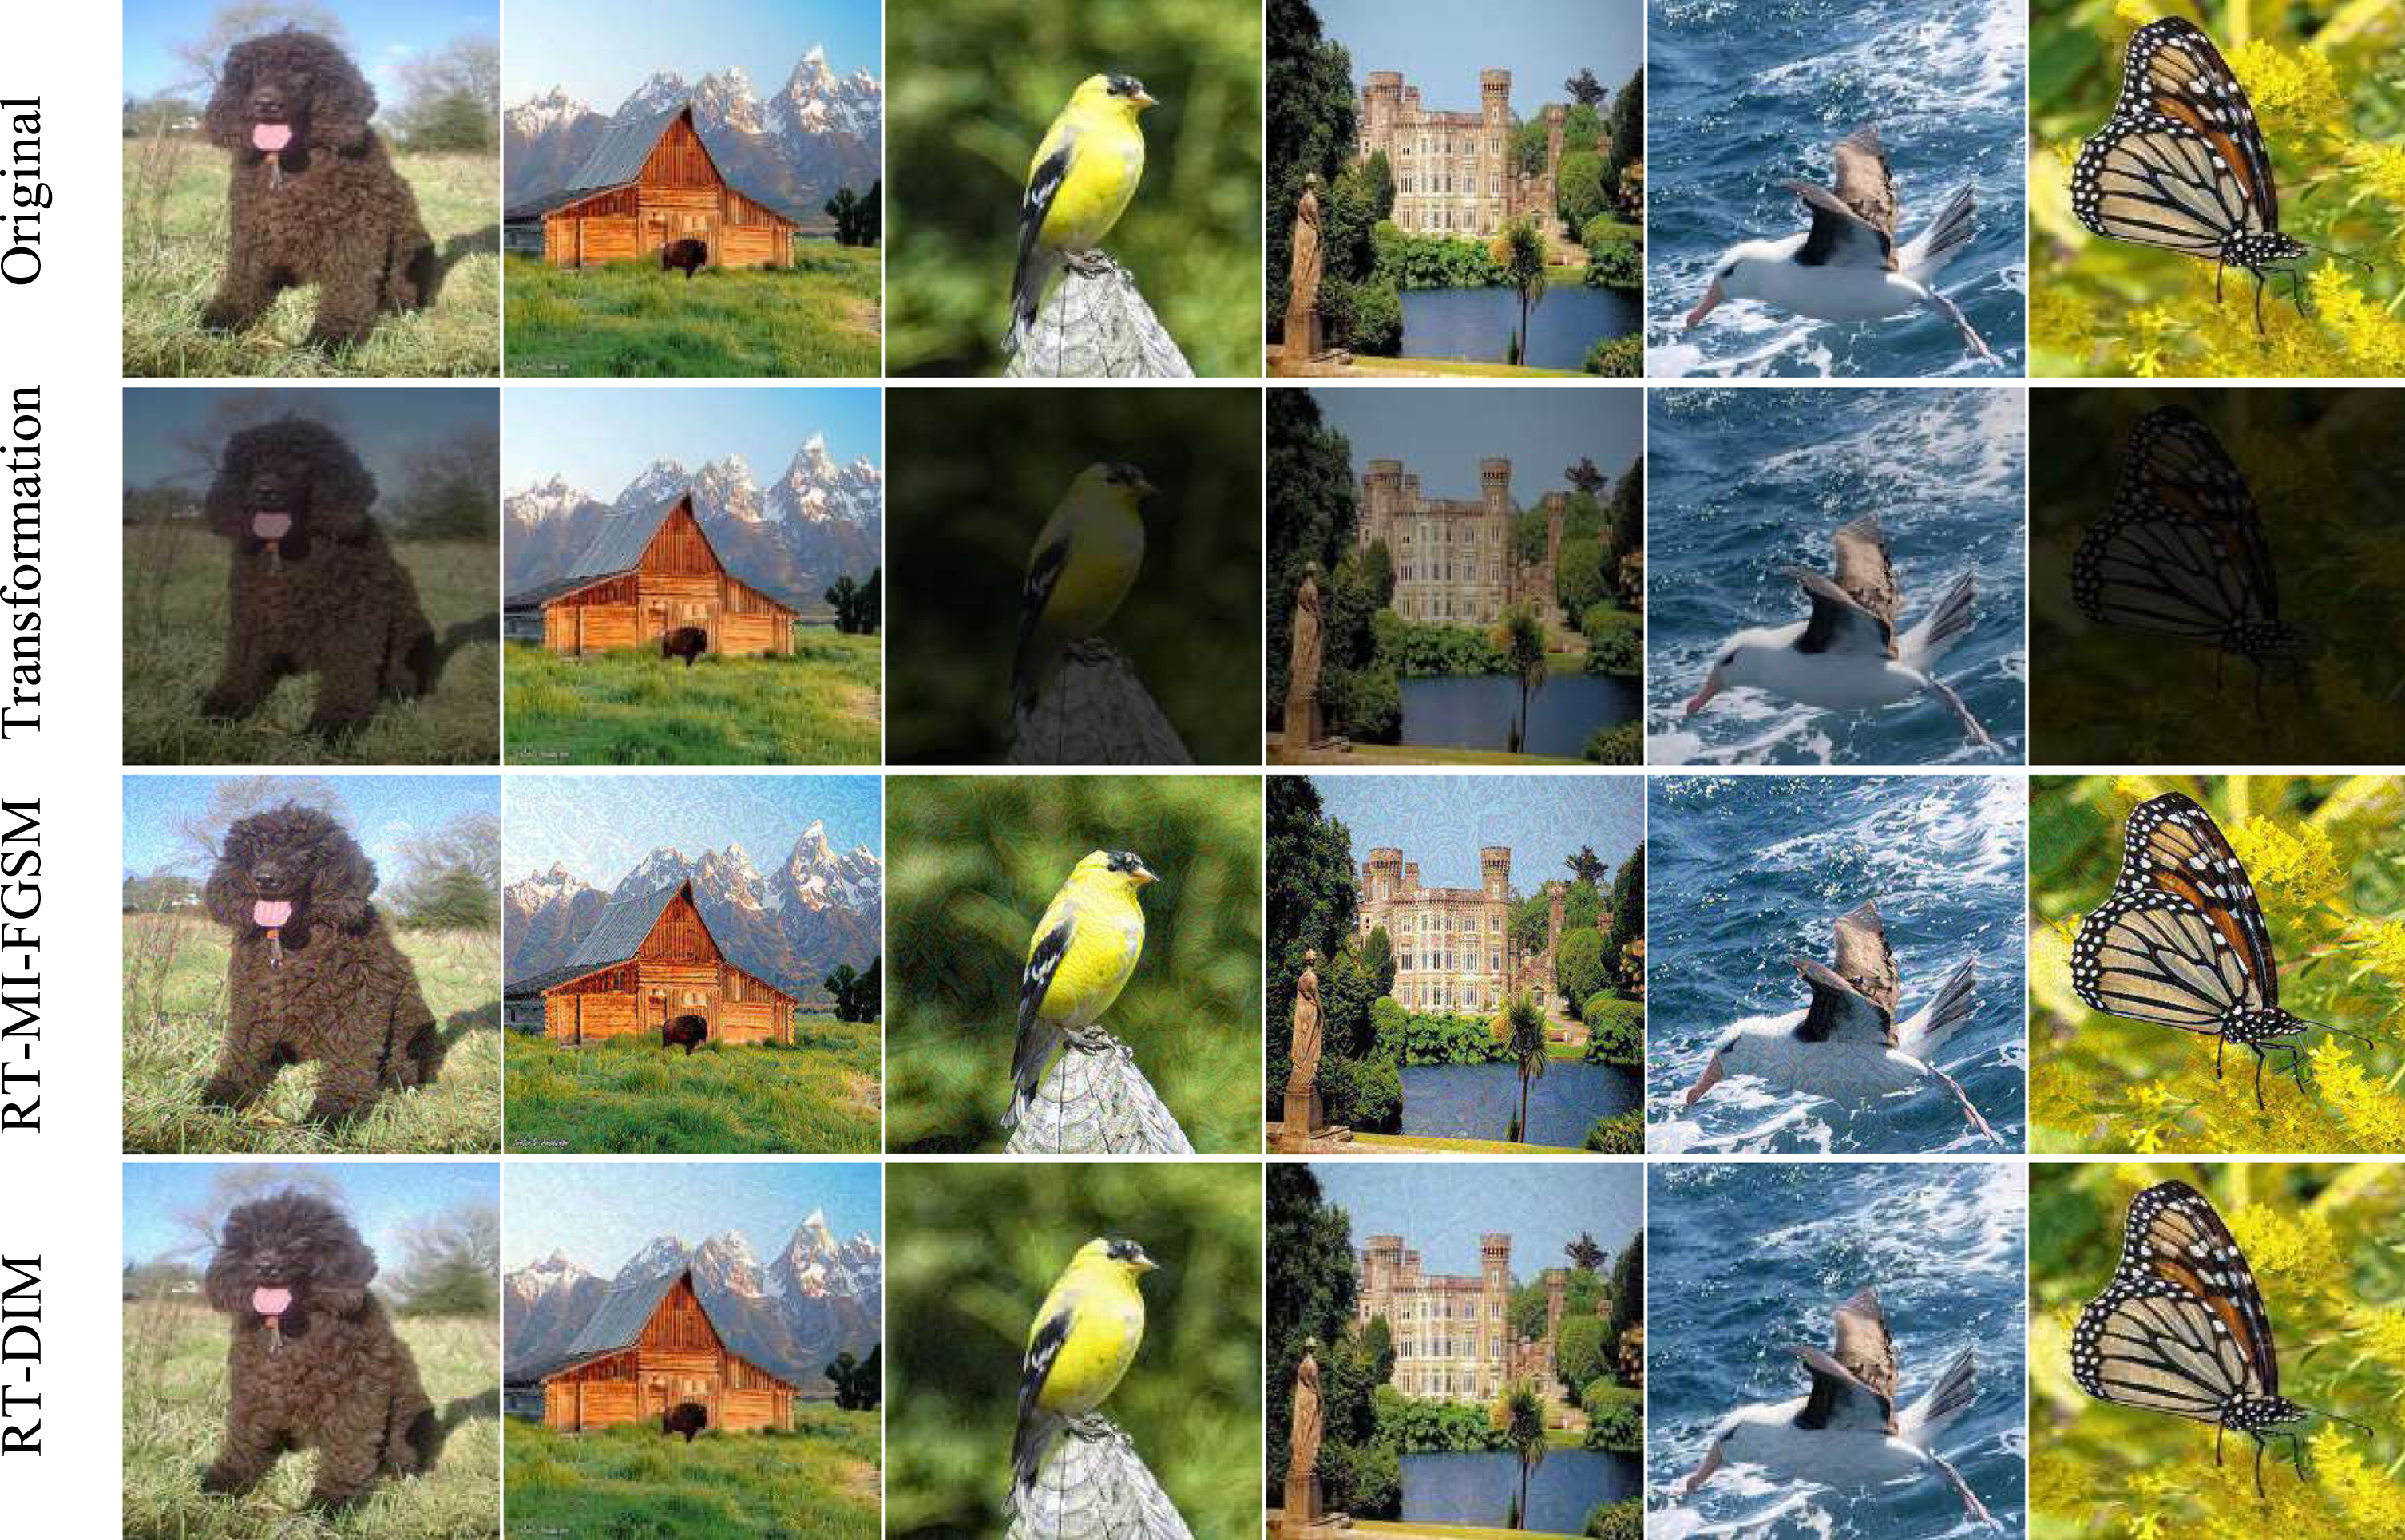 The adversarial examples are crafted on Inc-v3 by RT-MI-FGSM and RT-DIM method respectively. Images from first to third line are original inputs, randomly transformed images, and generated adversarial examples, respectively.